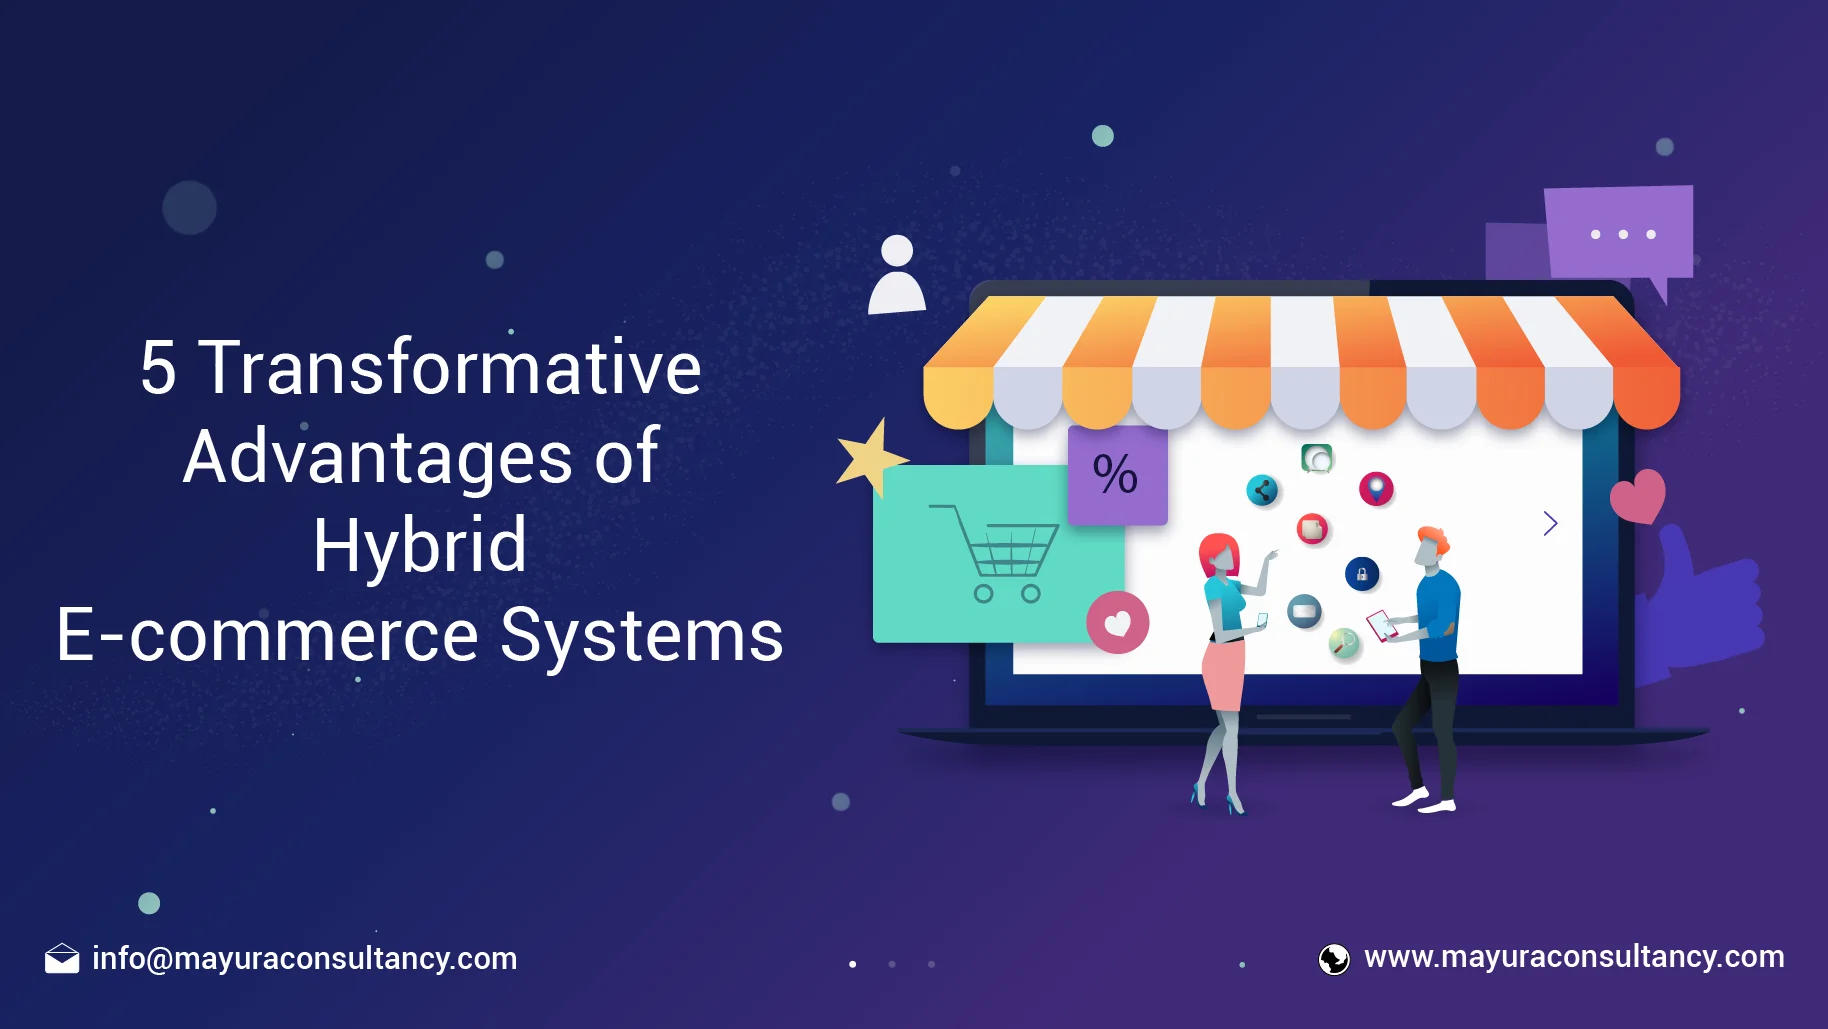 5 Advantages of Hybrid Ecommerce Systems